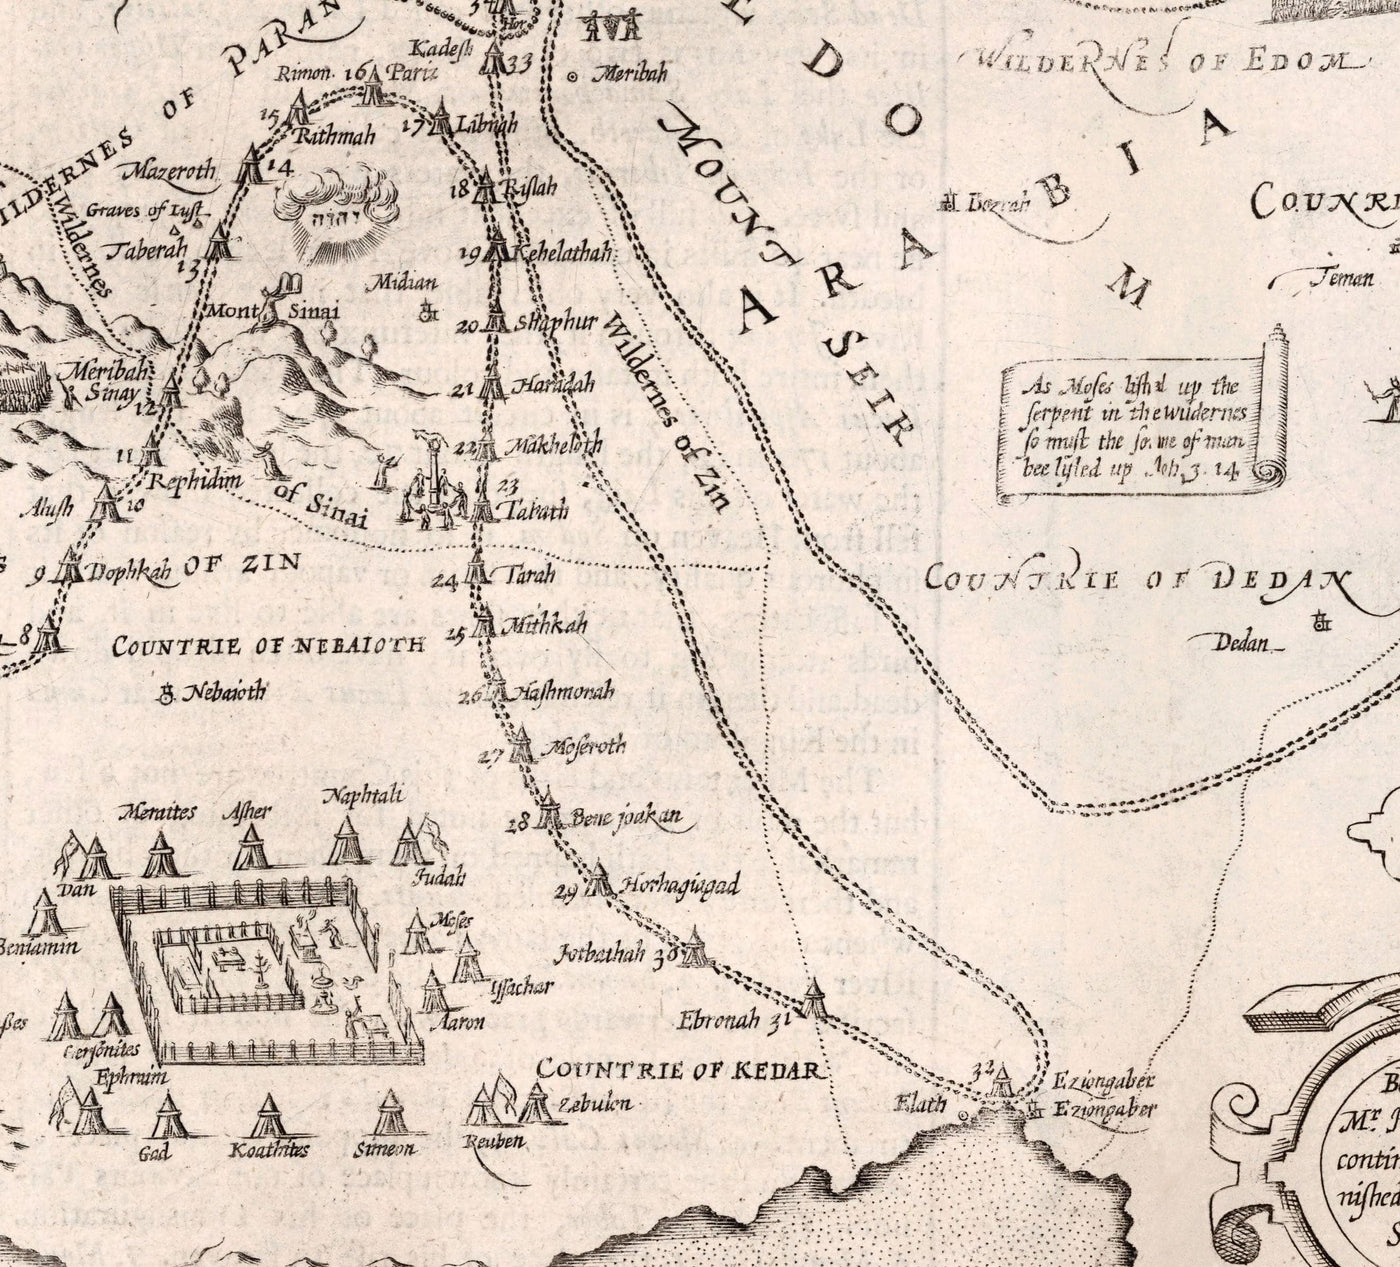 Old Map of Canaan, Israel, in 1627 by John Speed - Jerusalem, Levant, Palestine, Middle East - Moses & Bible Chart